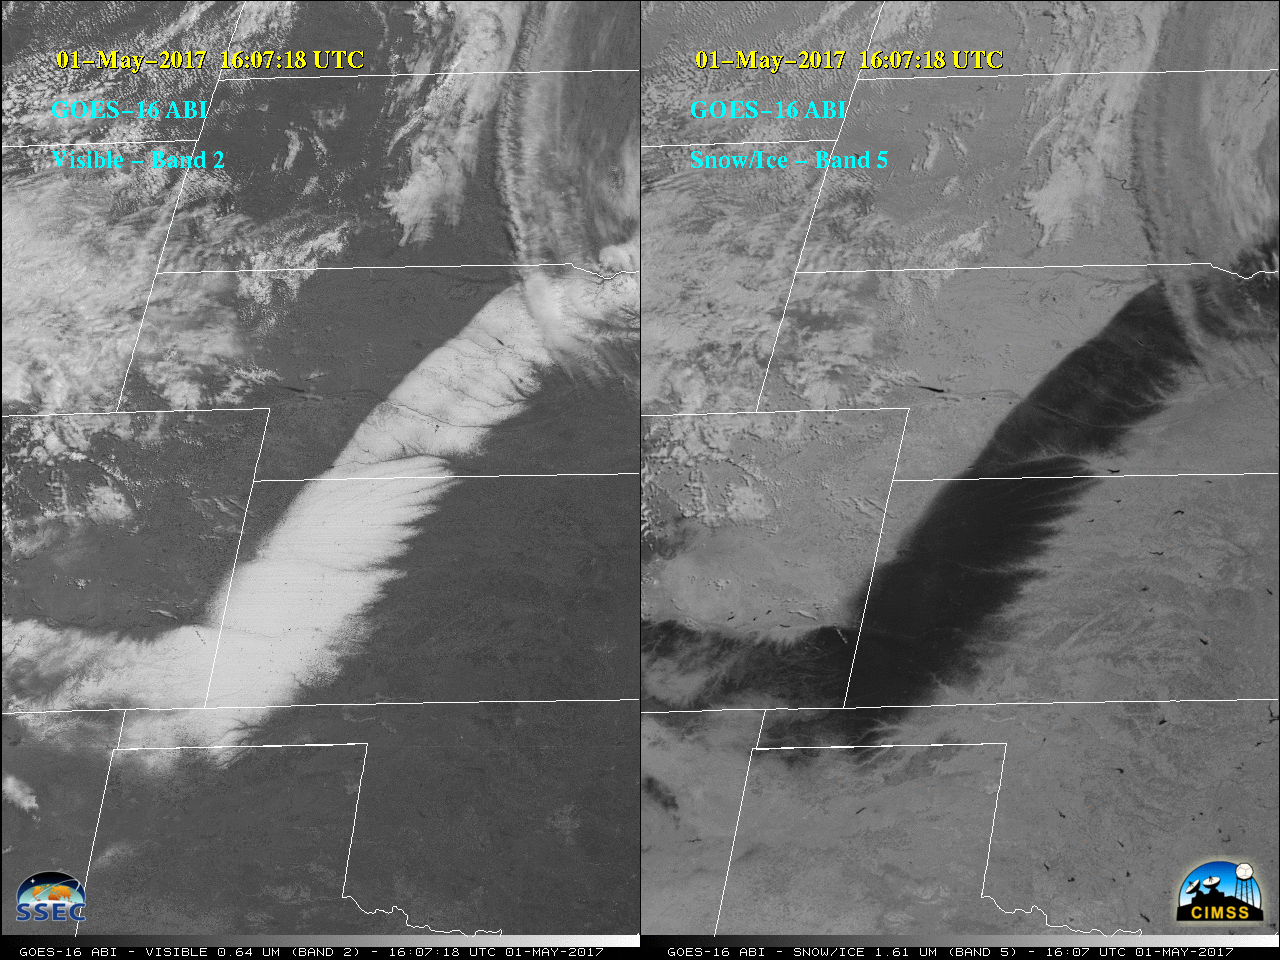 GOES-16 Visible (0.64 µm, left) and Snow/Ice (1.61 µm, right) images [click to animate]